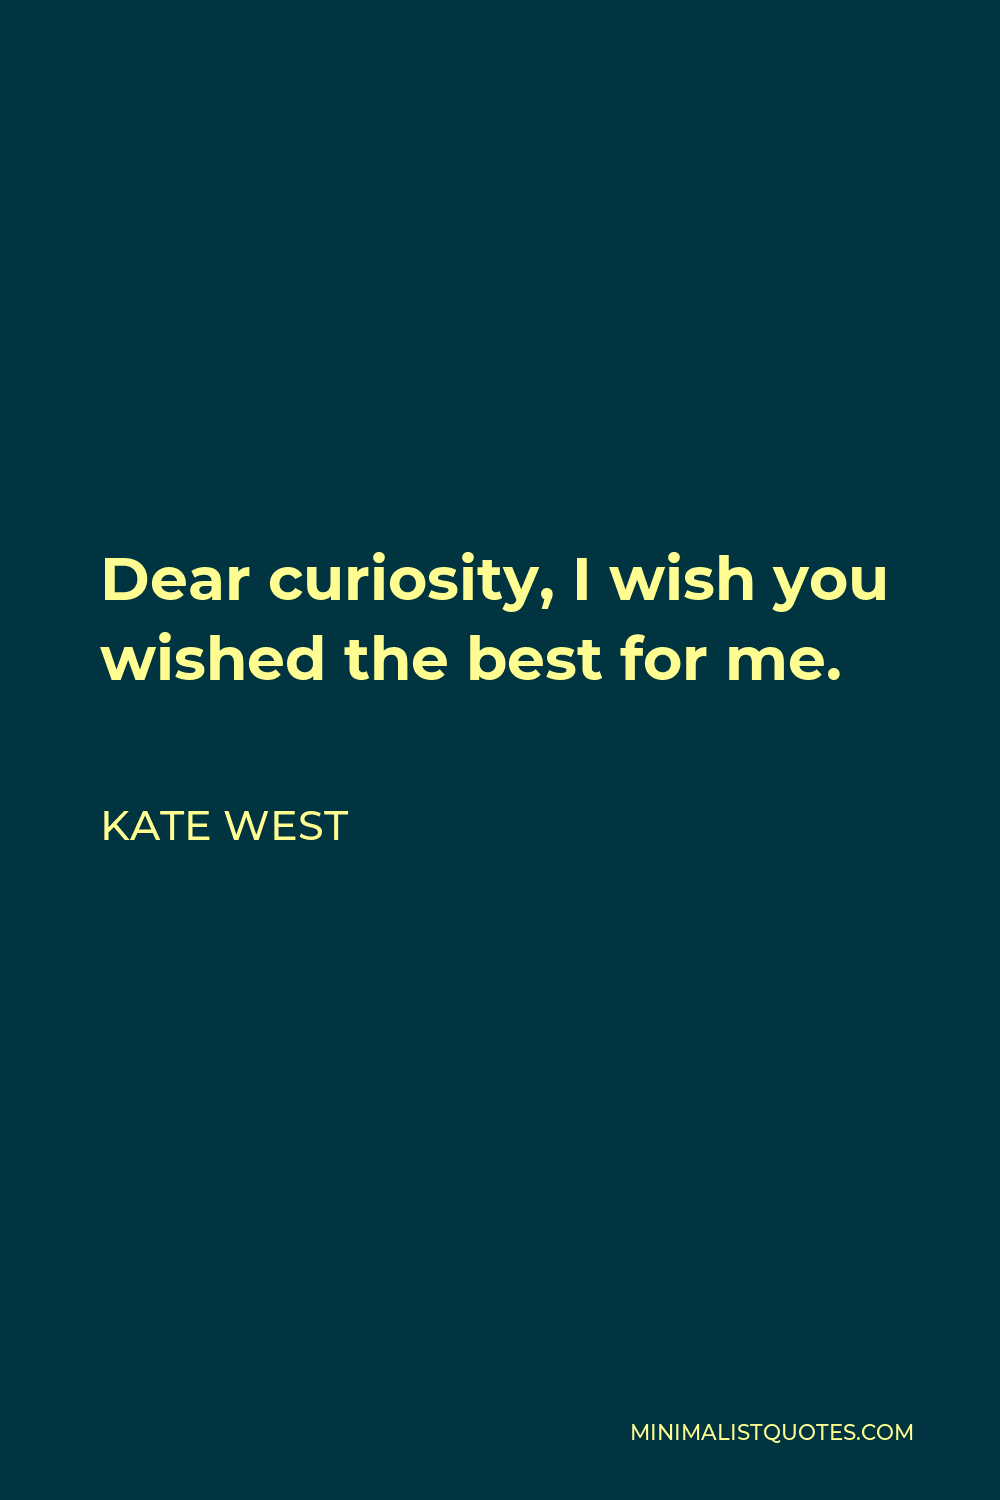 Kate West Quote - Dear curiosity, I wish you wished the best for me.